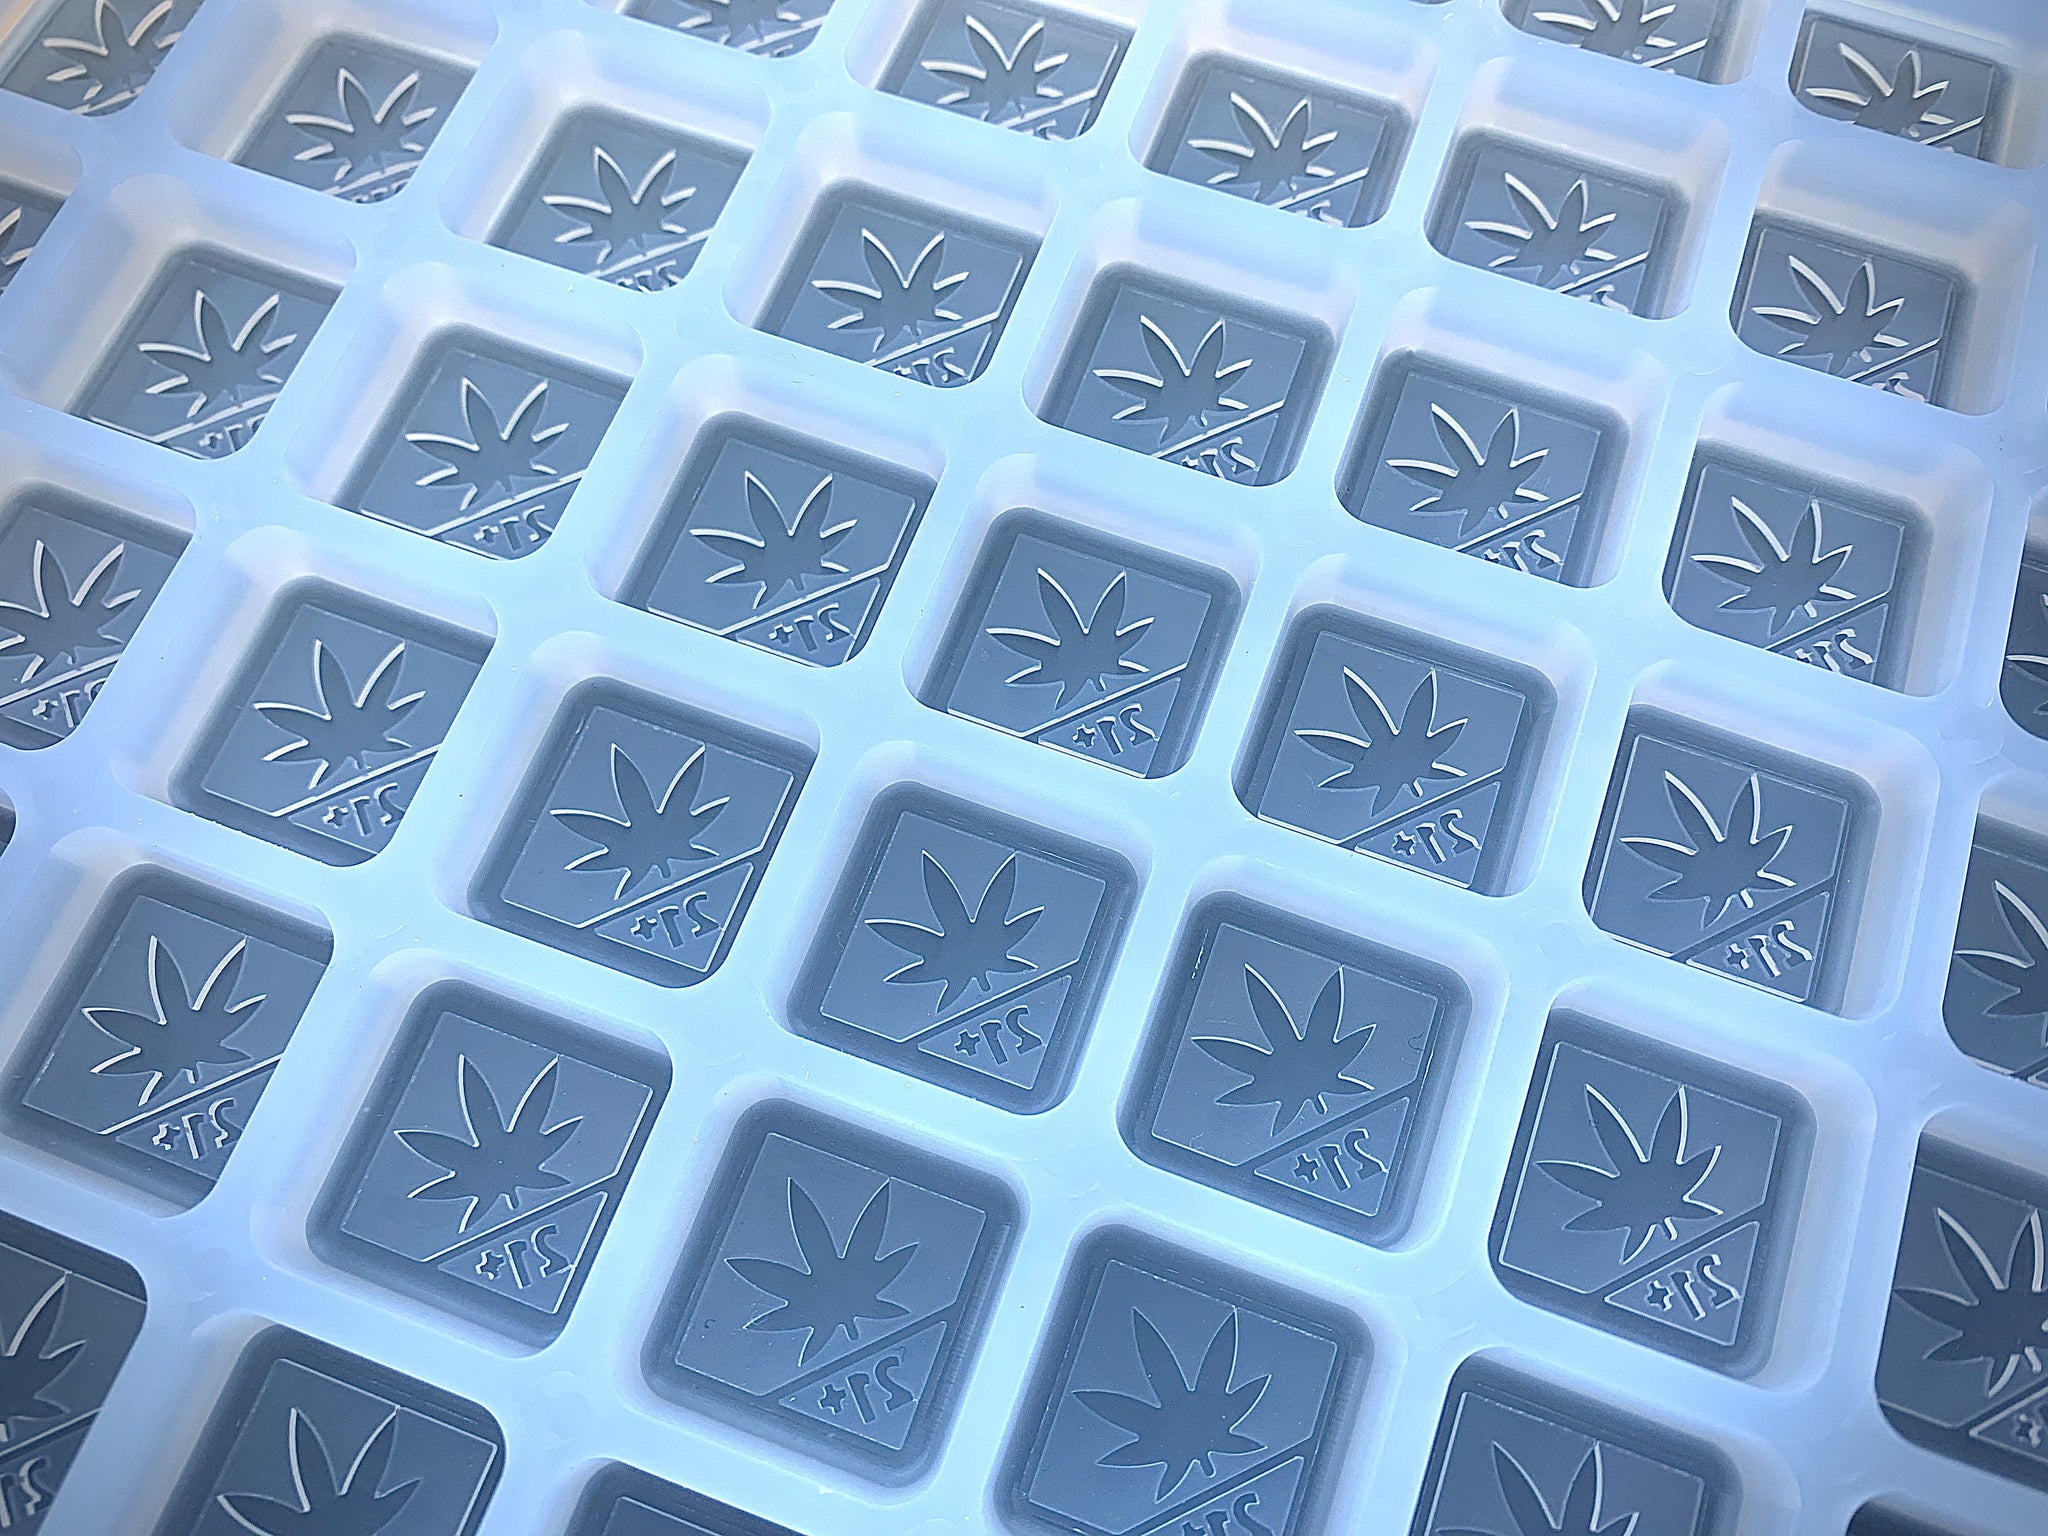 Washington state thc silicone gummy mold embossed with 21+ and pot leaf